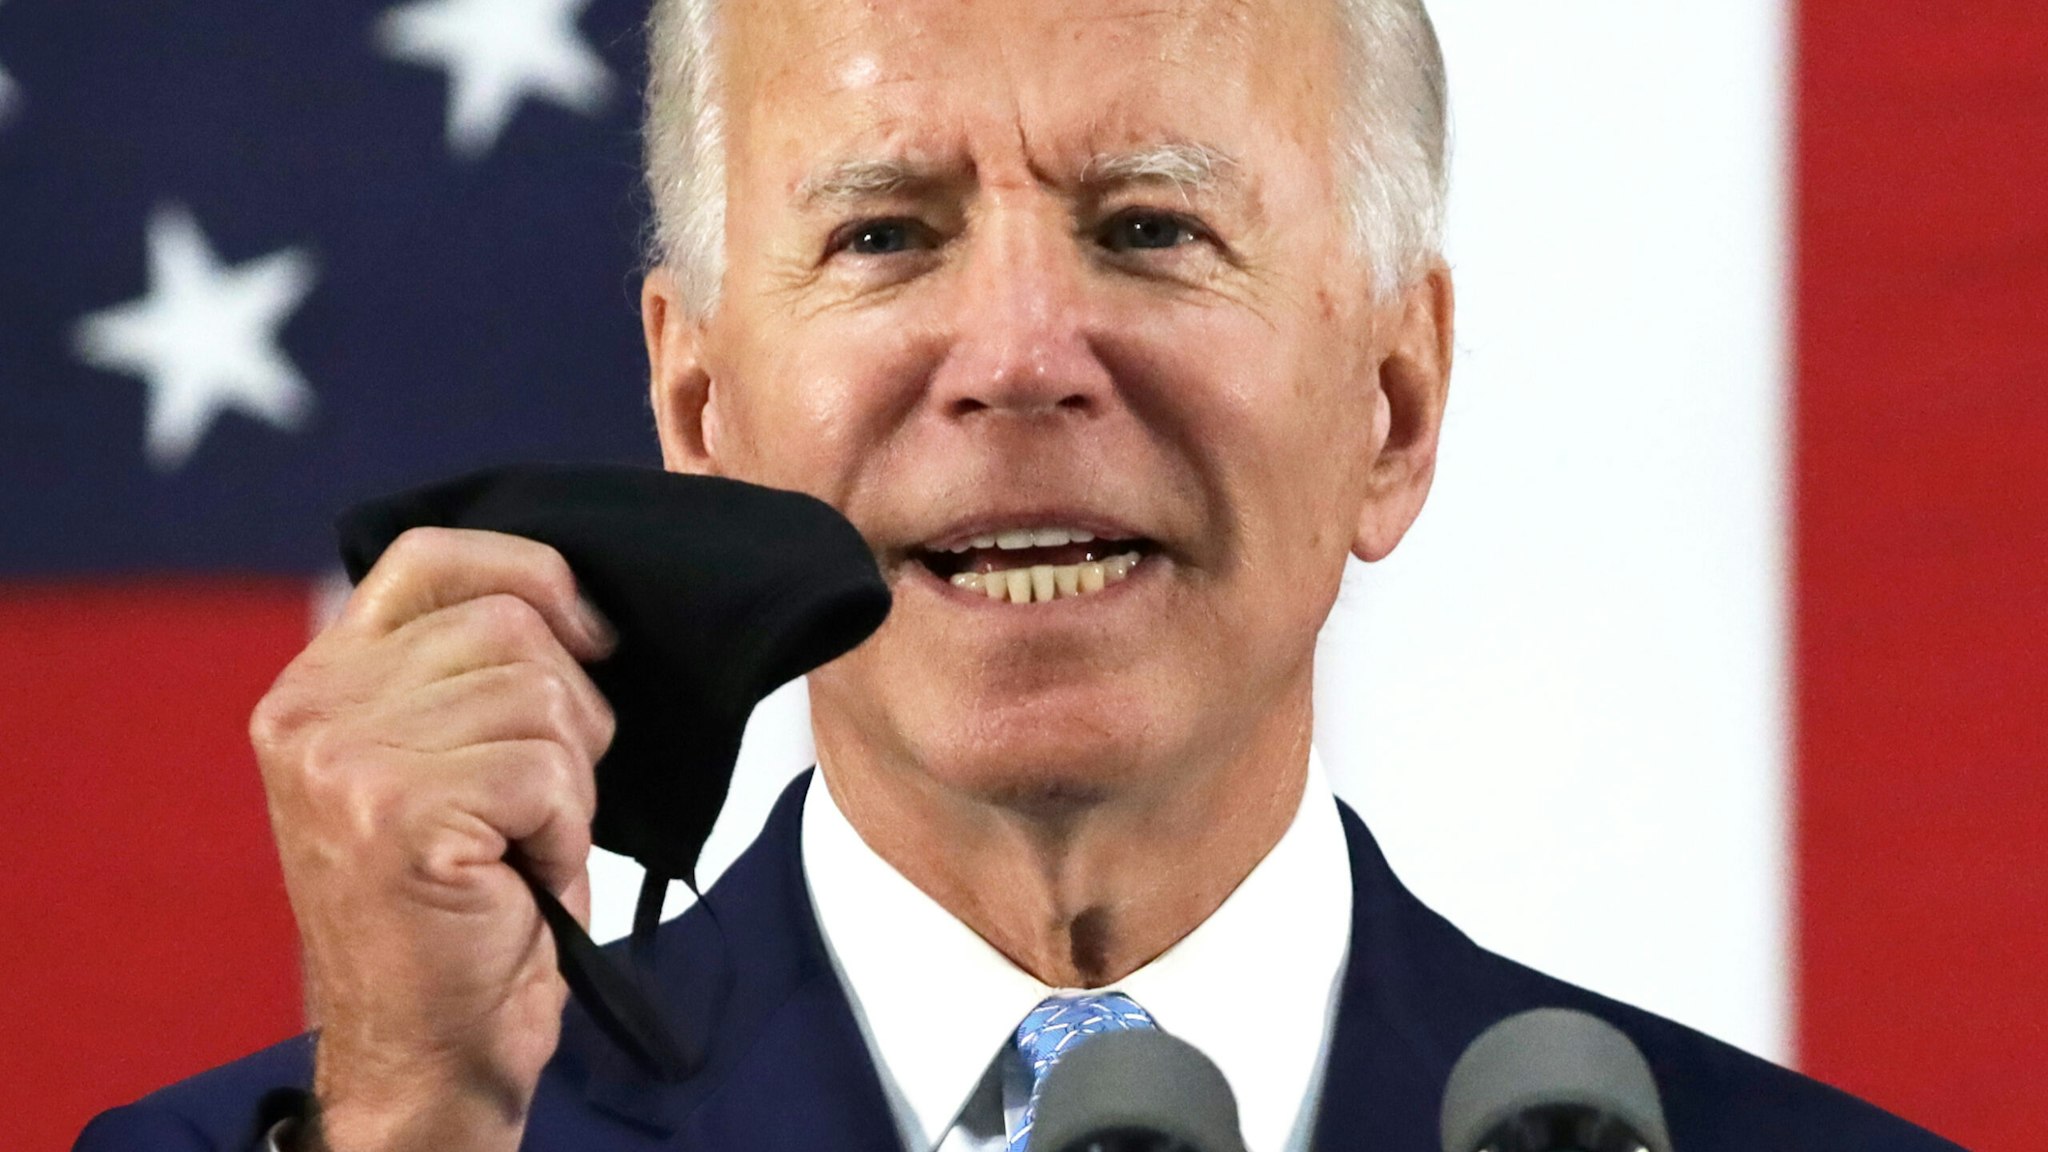 WILMINGTON, DELAWARE - JUNE 30: Democratic presidential candidate, former Vice President Joe Biden holds up a mask as he speaks during a campaign event June 30, 2020 at Alexis I. Dupont High School in Wilmington, Delaware. Biden discussed the Trump Administration’s handling of the COVID-19 pandemic. (Photo by Alex Wong/Getty Images)